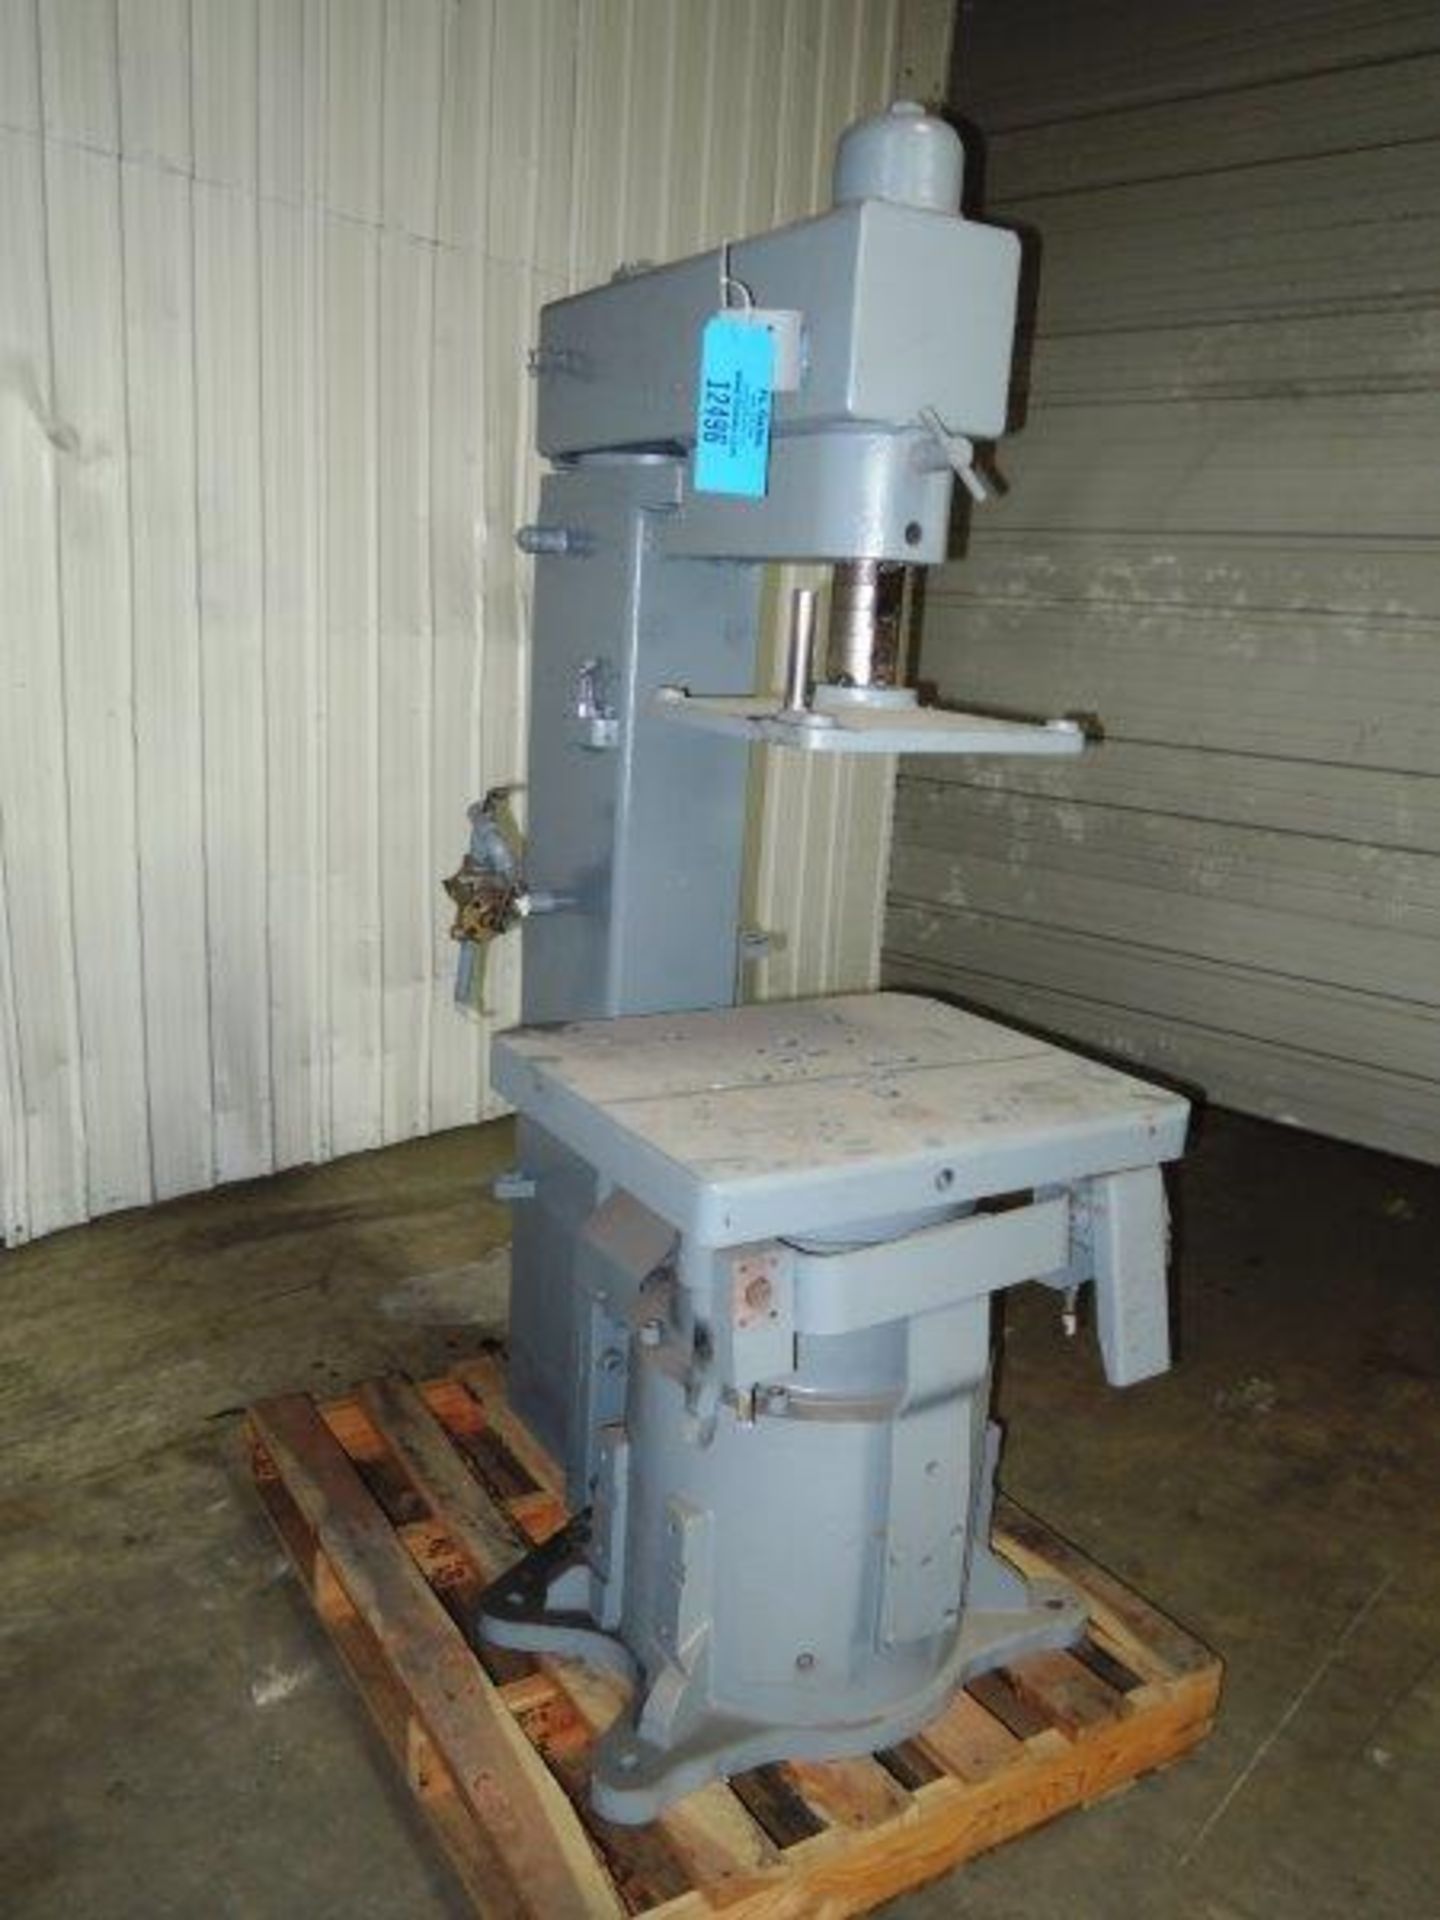 BMM MODEL QSF 210 JOLT SQUEESE MOLDING MACHINE S/N DH-7540, MODEL V-2669 [WALTON HILLS, OH] - Image 2 of 3